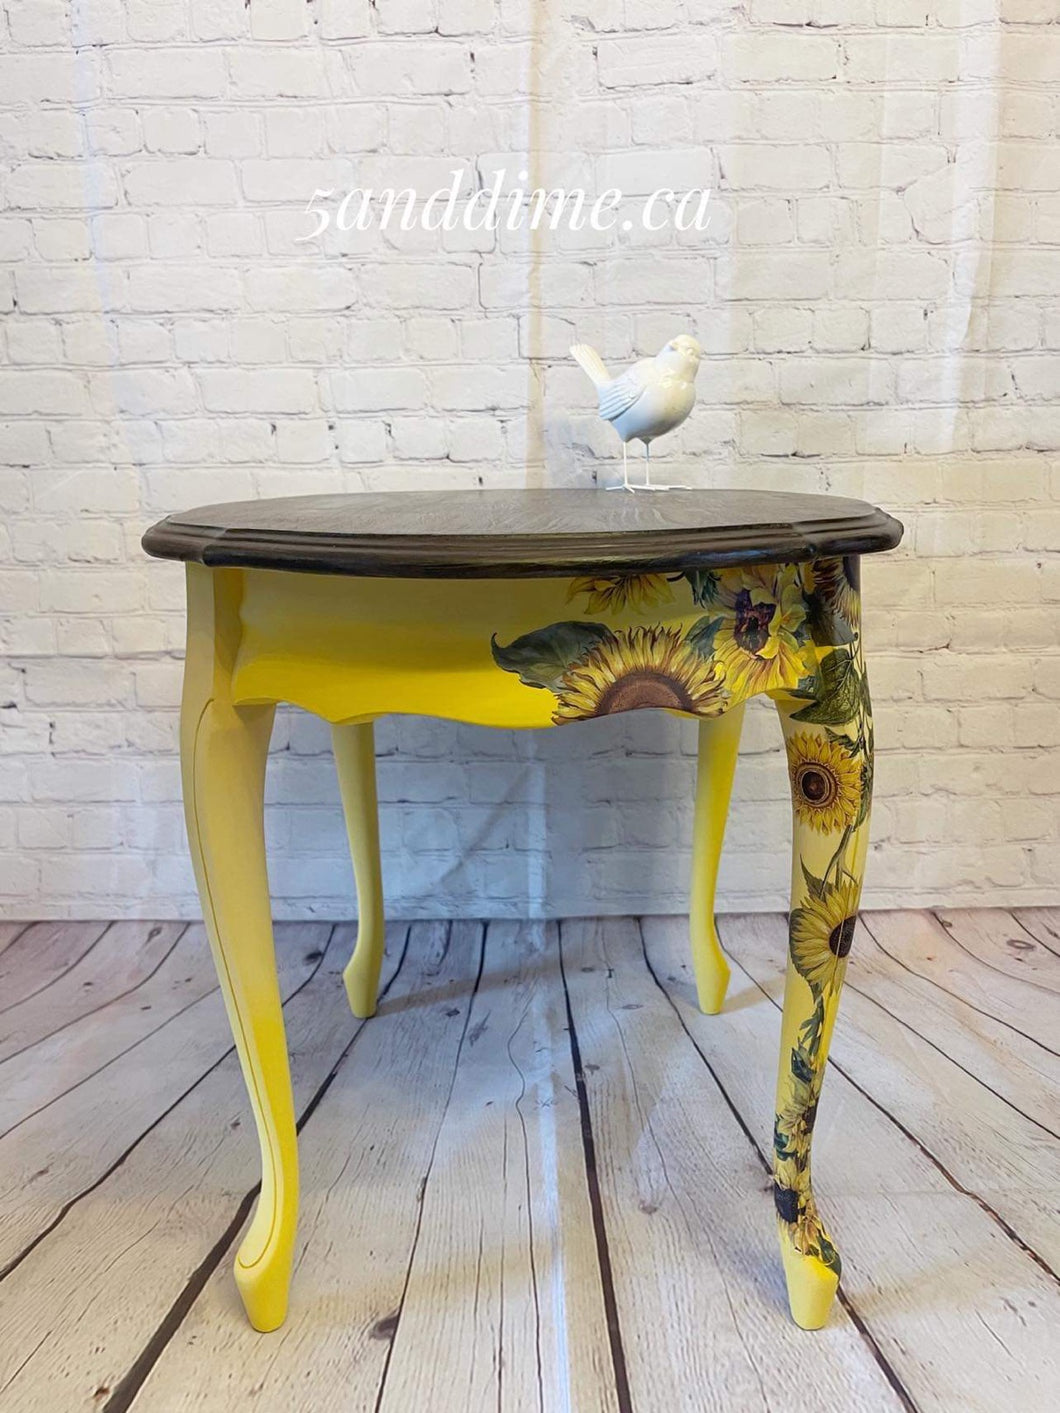 Upcycled Sunflower Accent Table